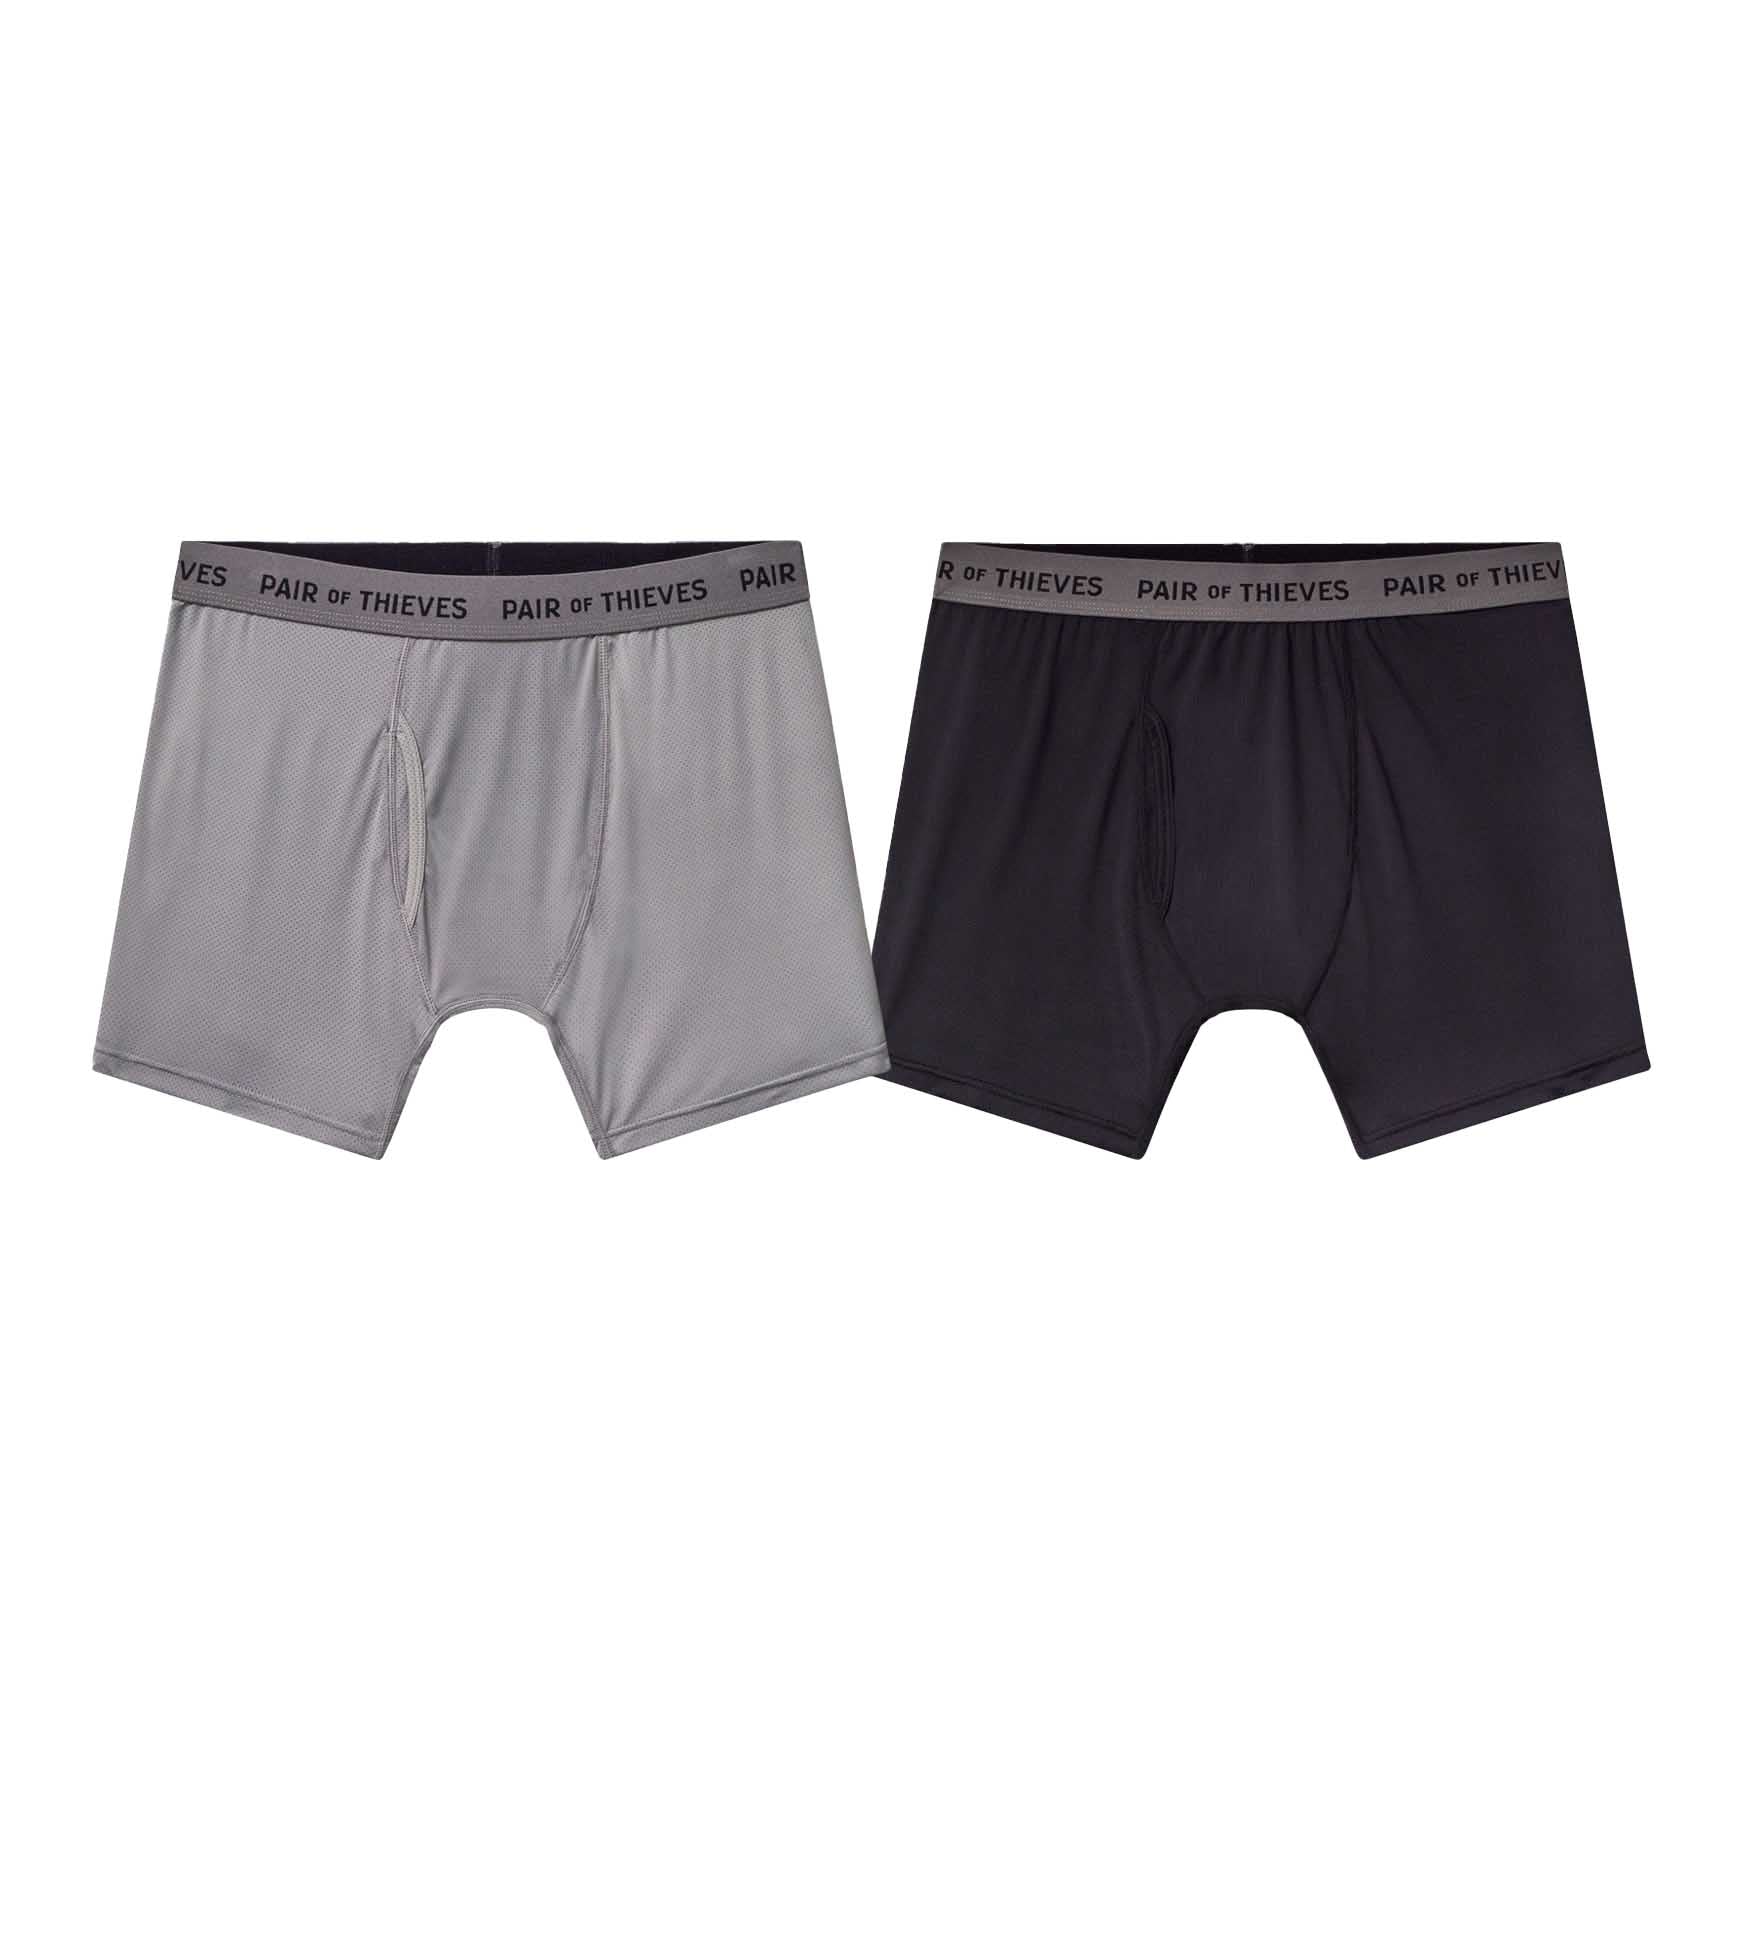 Pair of Thieves Men's Super Fit Boxer Briefs 2pk - Green/Gray